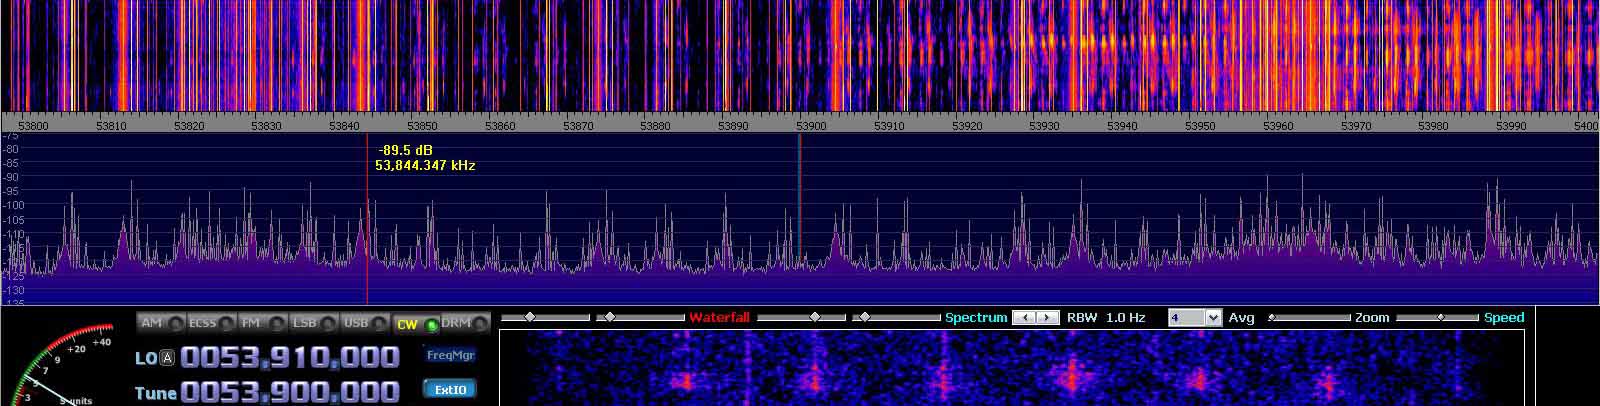 2014-07-04 53.900 MHz +- 100 kHz - Strong Es - 4-el dipole array with ends to St P - (c) OH7HJ.JPG